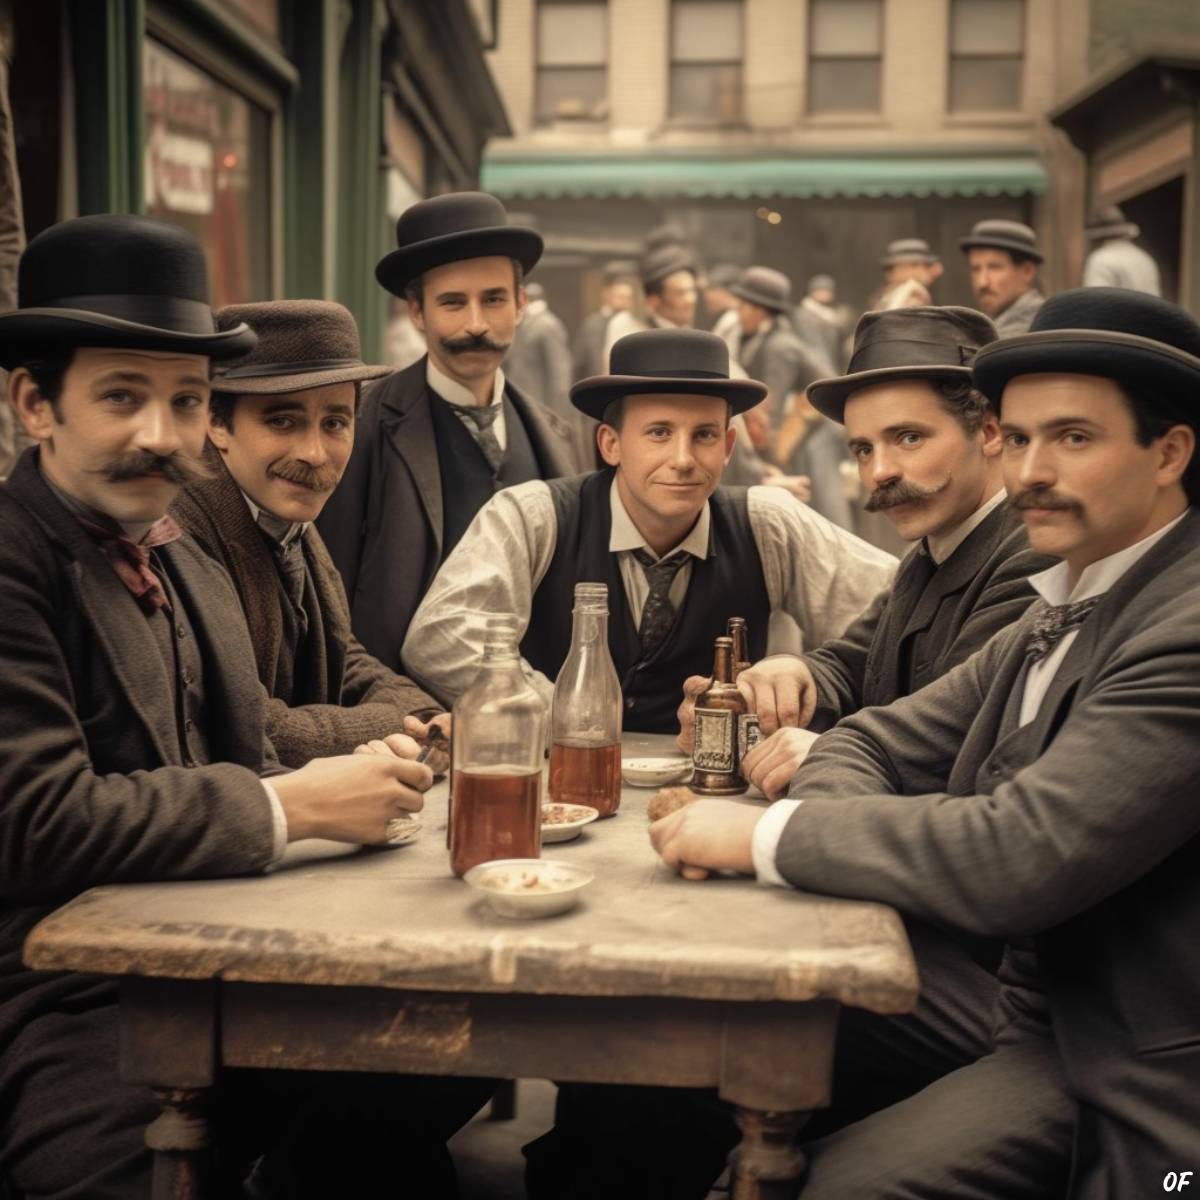 In the bustling heart of 1890s New York, a convivial group of men congregated outside a delicatessen, savoring their drinks amidst the city's lively hum.